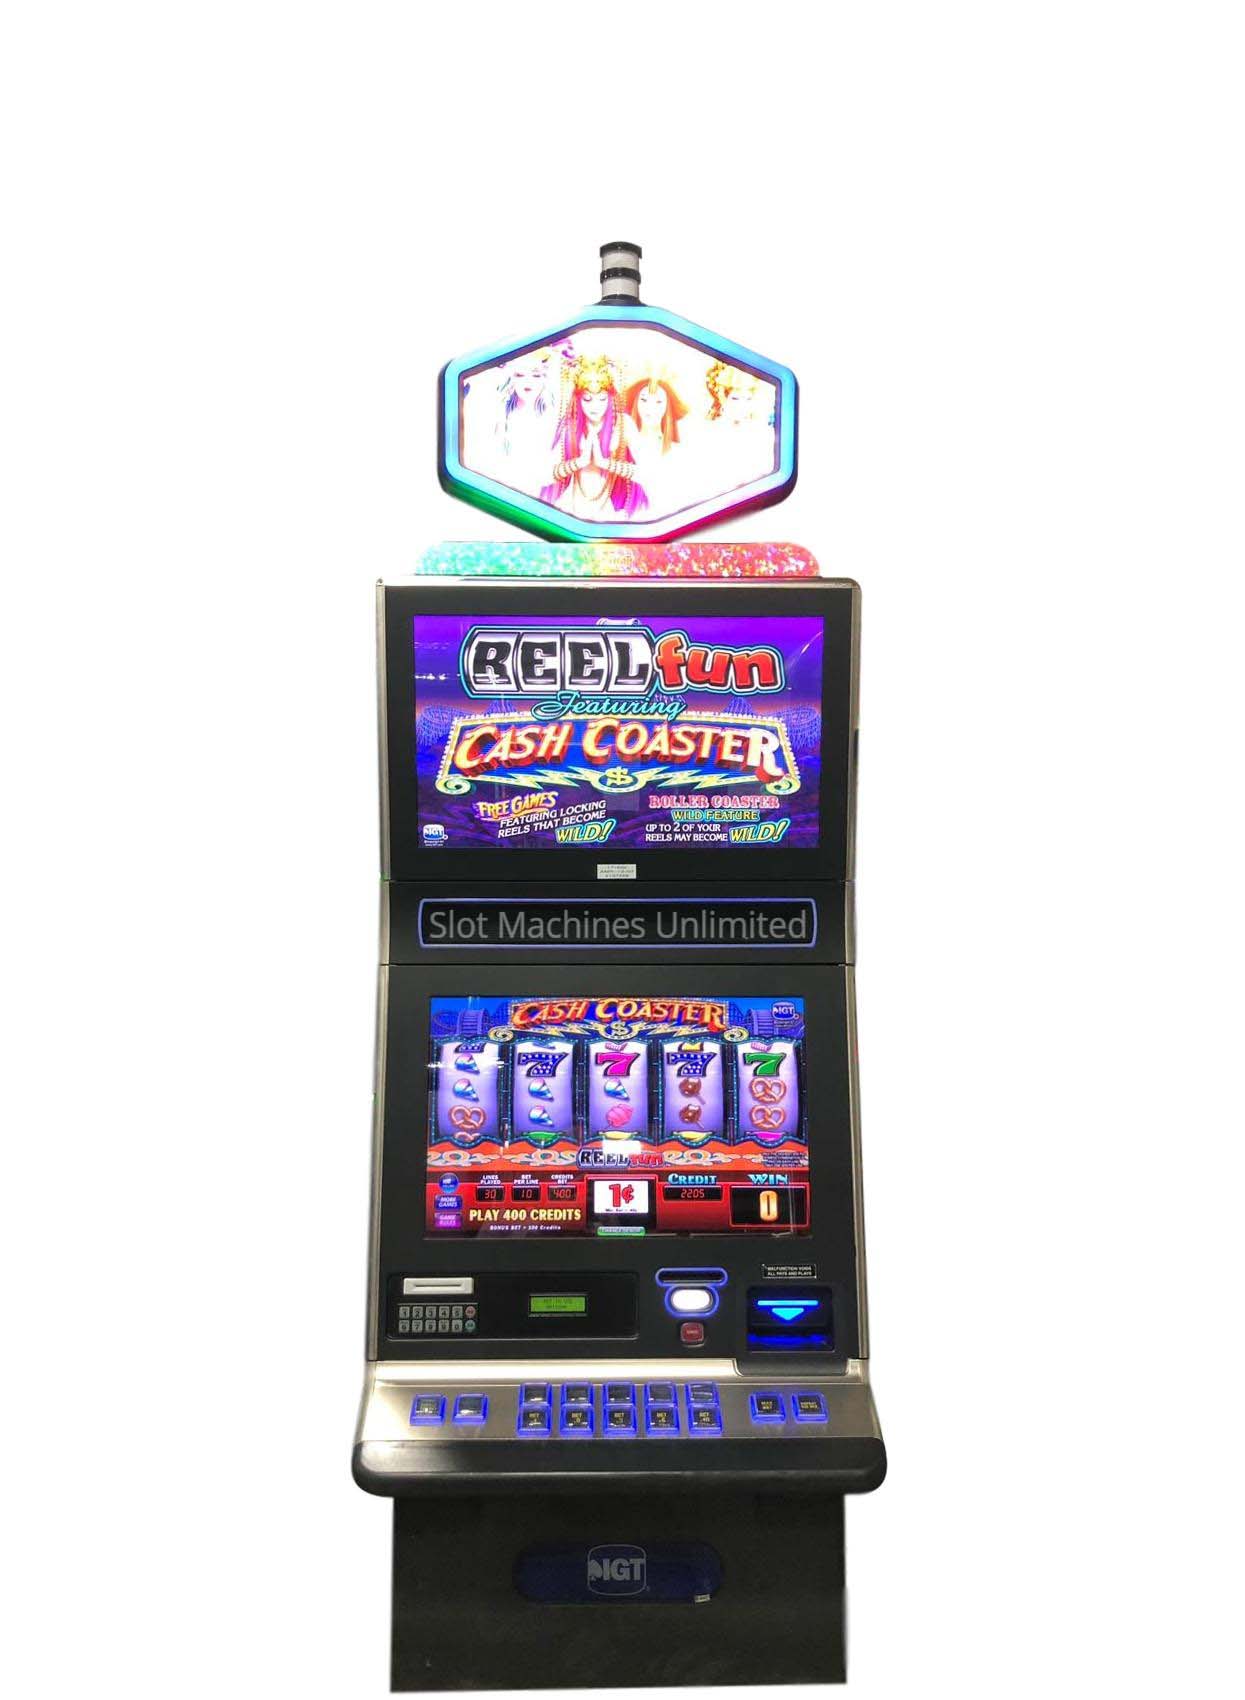 Screenshot of the Cash Coaster slot by IGT